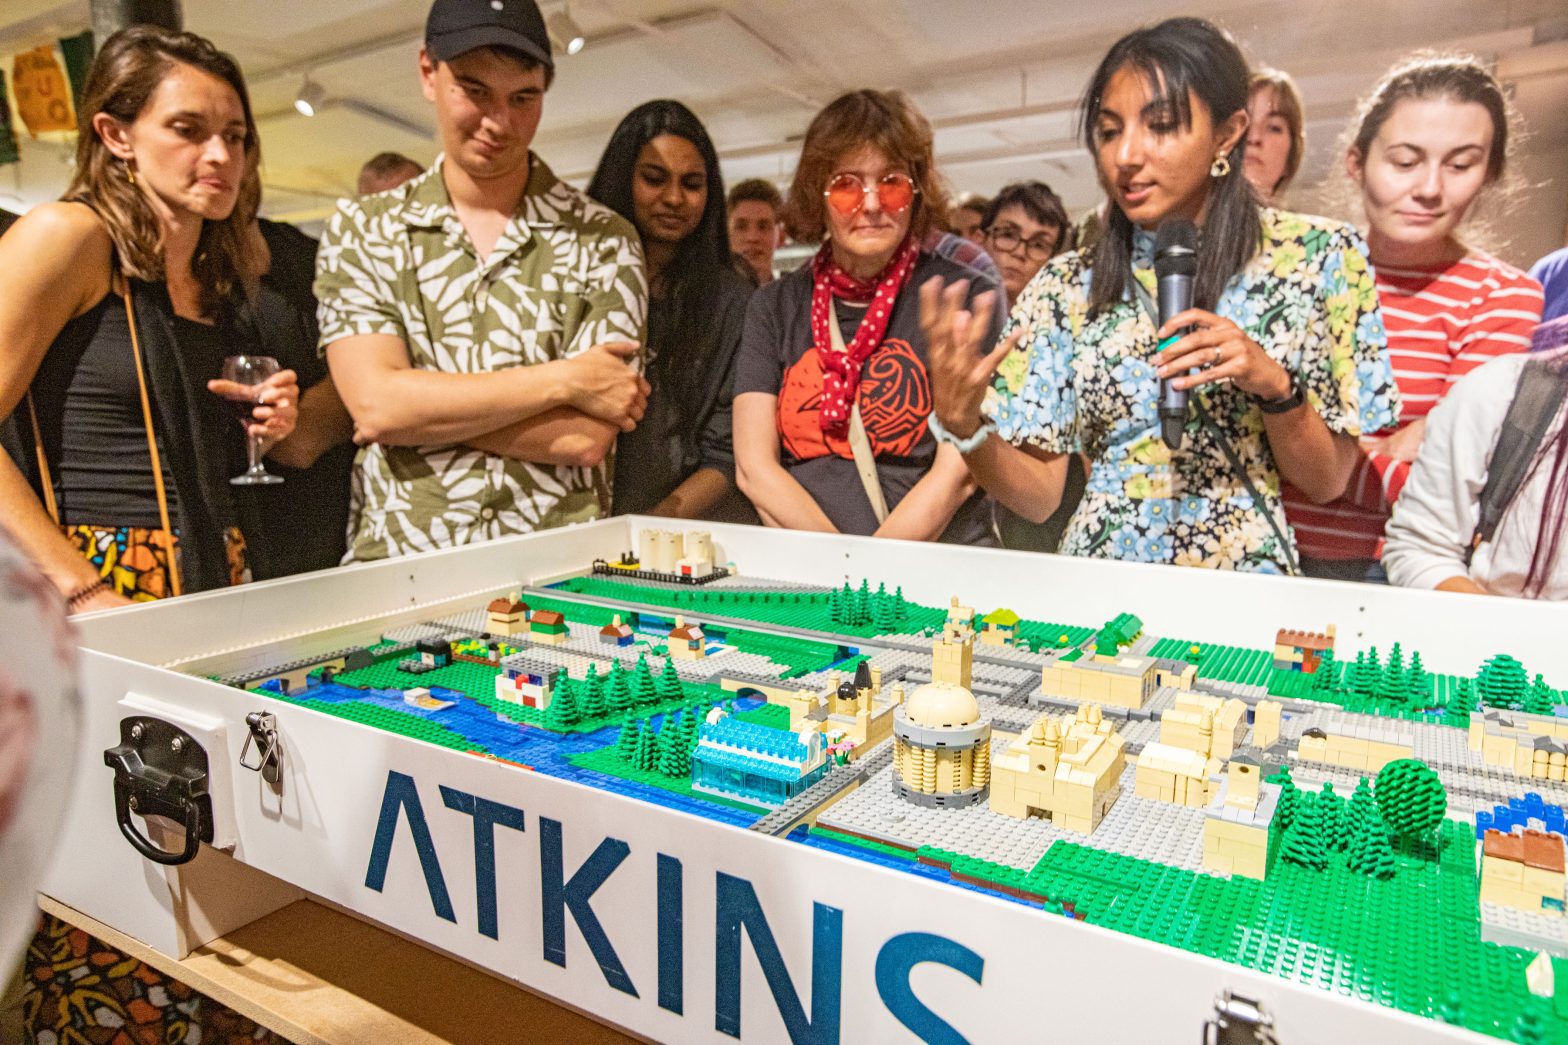 A group of people standing around a large lego model of the city of Oxford. Writing on the walls of the lego model read "Atkins"